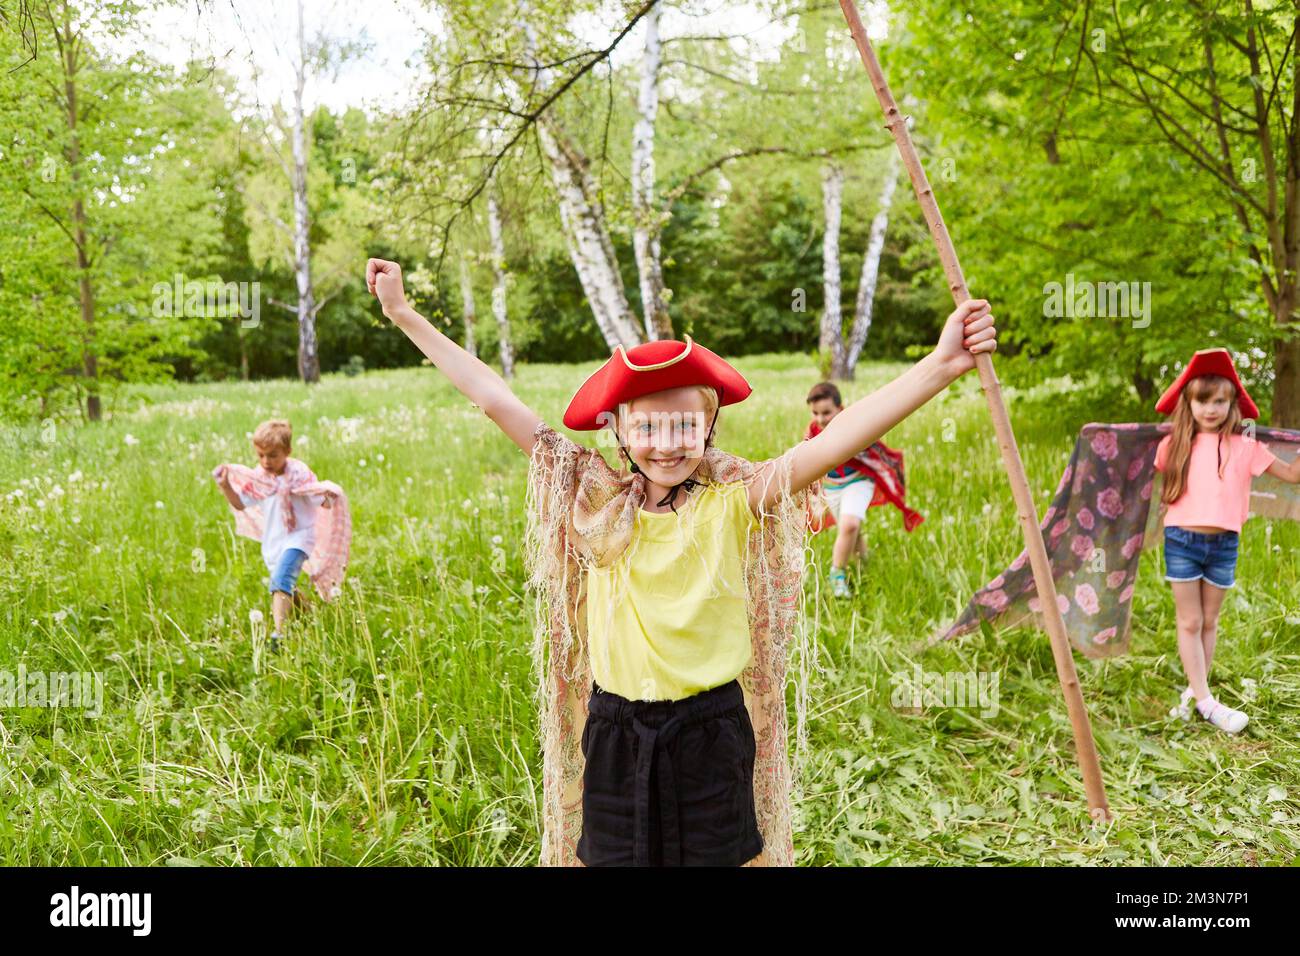 Smiling girl with tricorn hat and stick standing arms outstretched in grass by friends Stock Photo